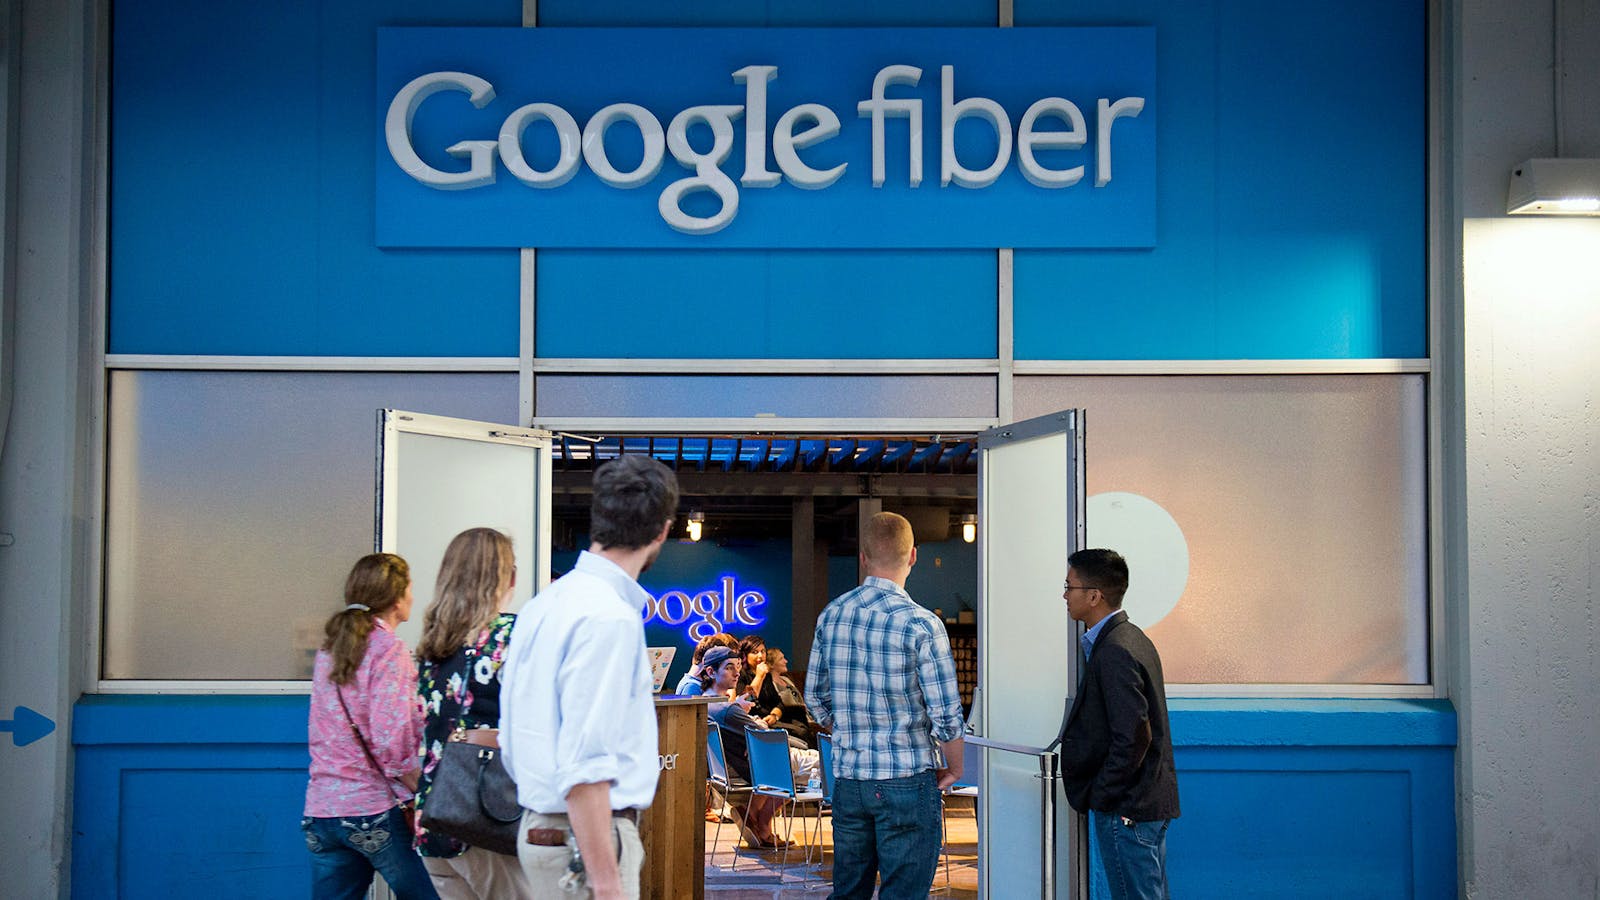 People walk past Google Fiber's store in Austin, Texas in April, 2015. Photo by Bloomberg.